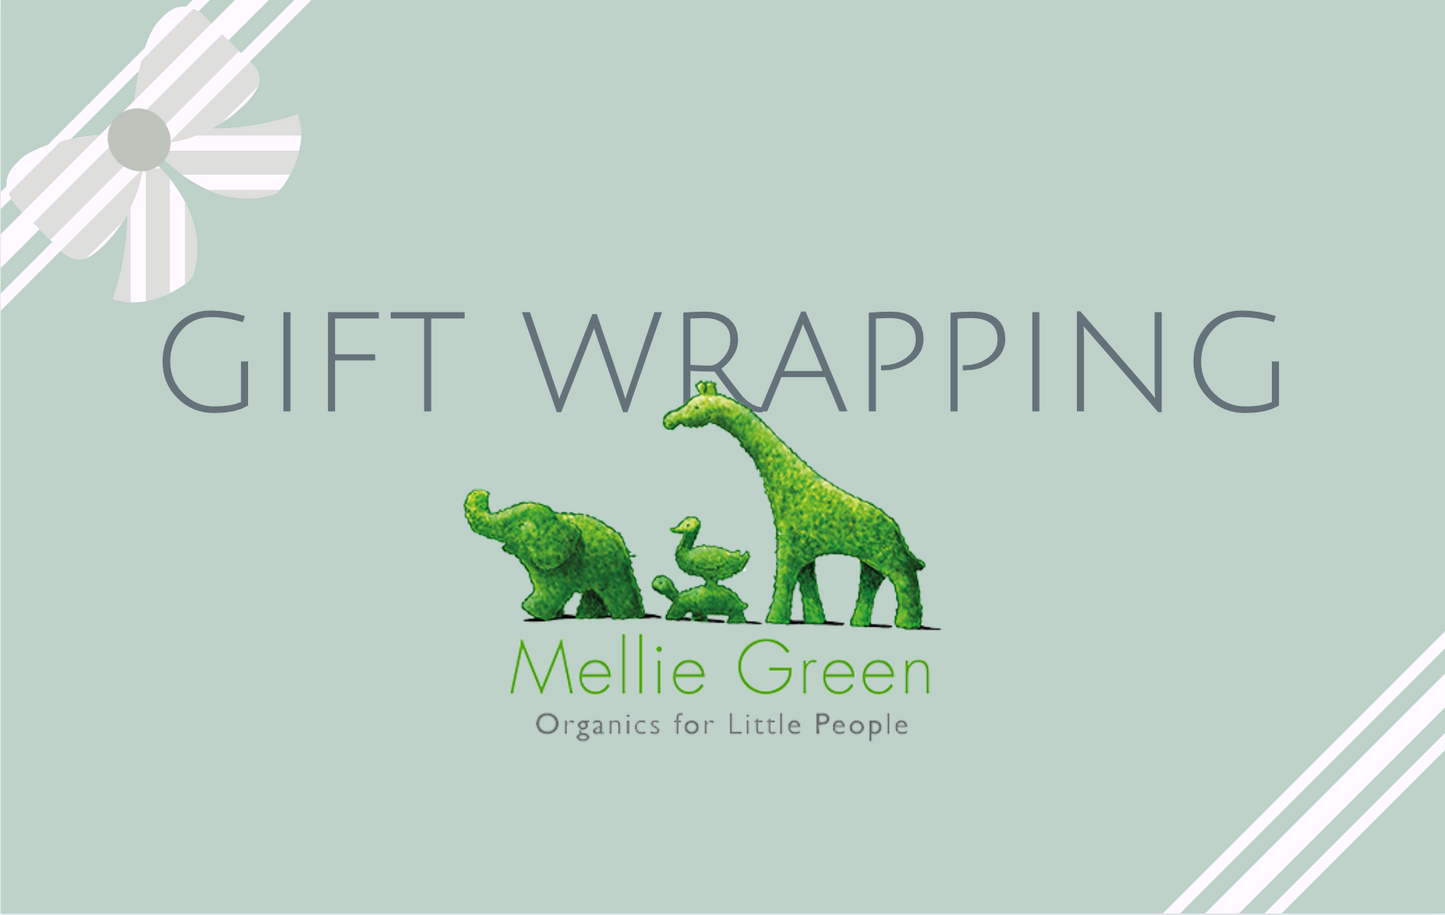 FREE Gift Wrapping